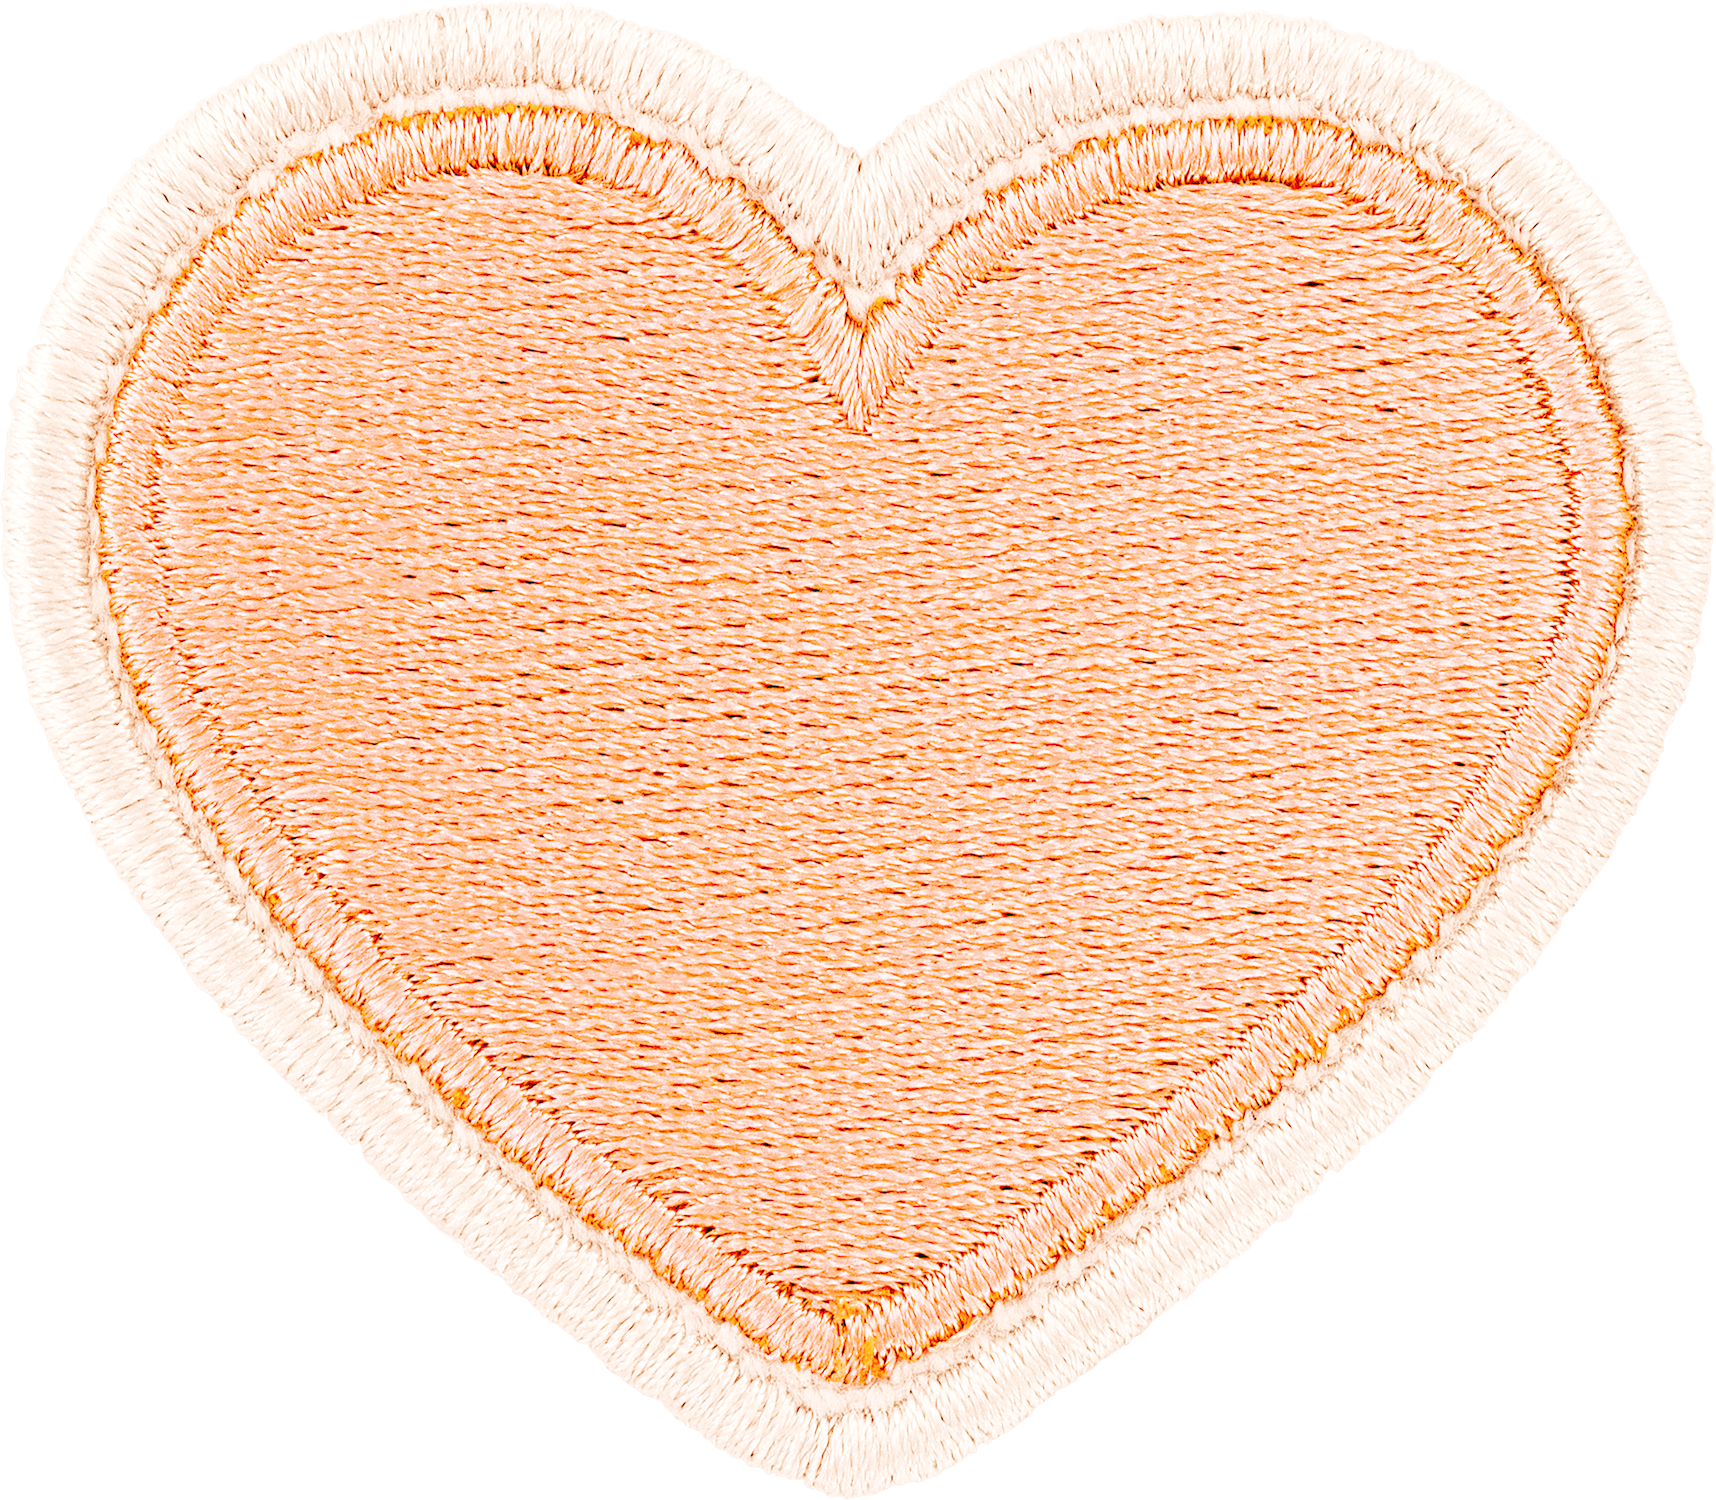 Stoney Clover Lane- Rolled Embroidery Heart Patch Peach